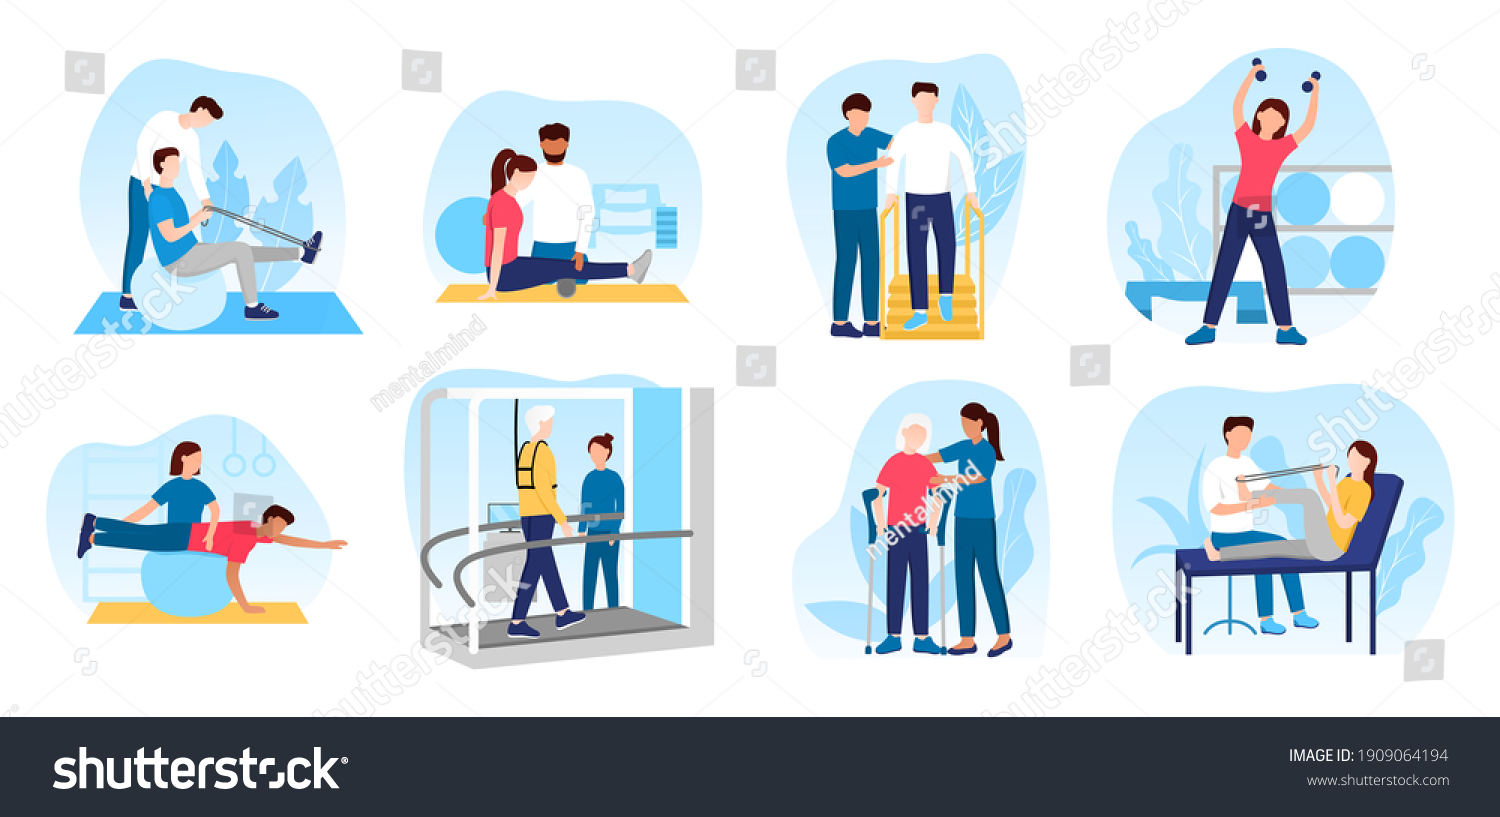 SVG of People in orthopedic therapy rehabilitation. Therapists character working with disabled patients, rehabilitating physical activity, physiotherapy. Set of flat cartoon vector illustrations svg